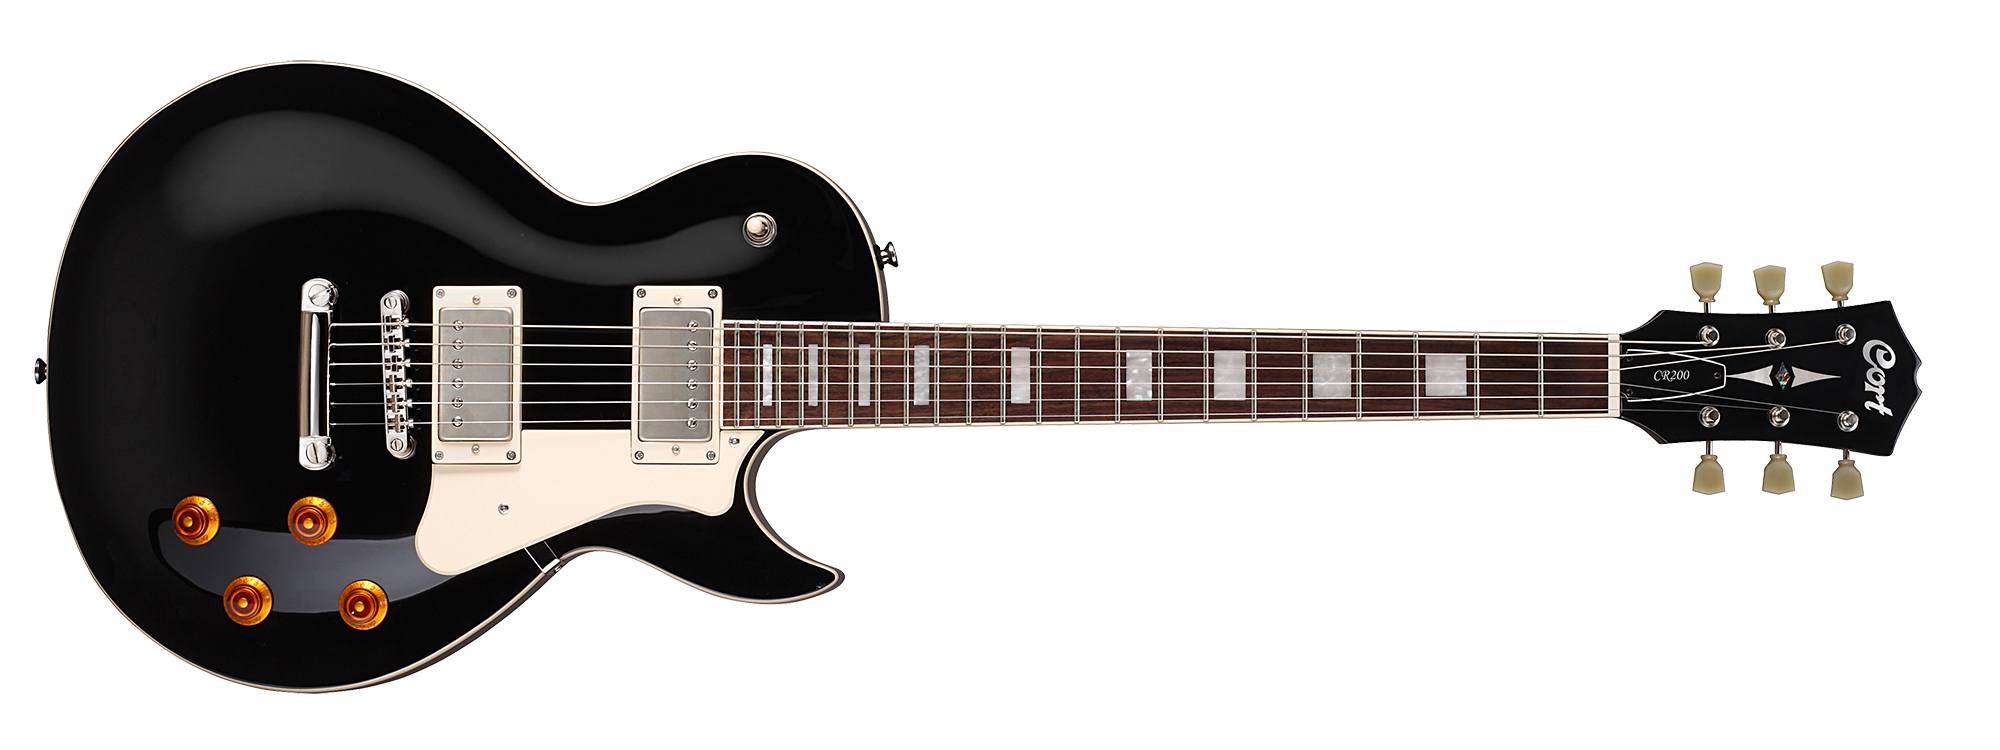 Cort CR200 Black, Electric Guitar for sale at Richards Guitars.